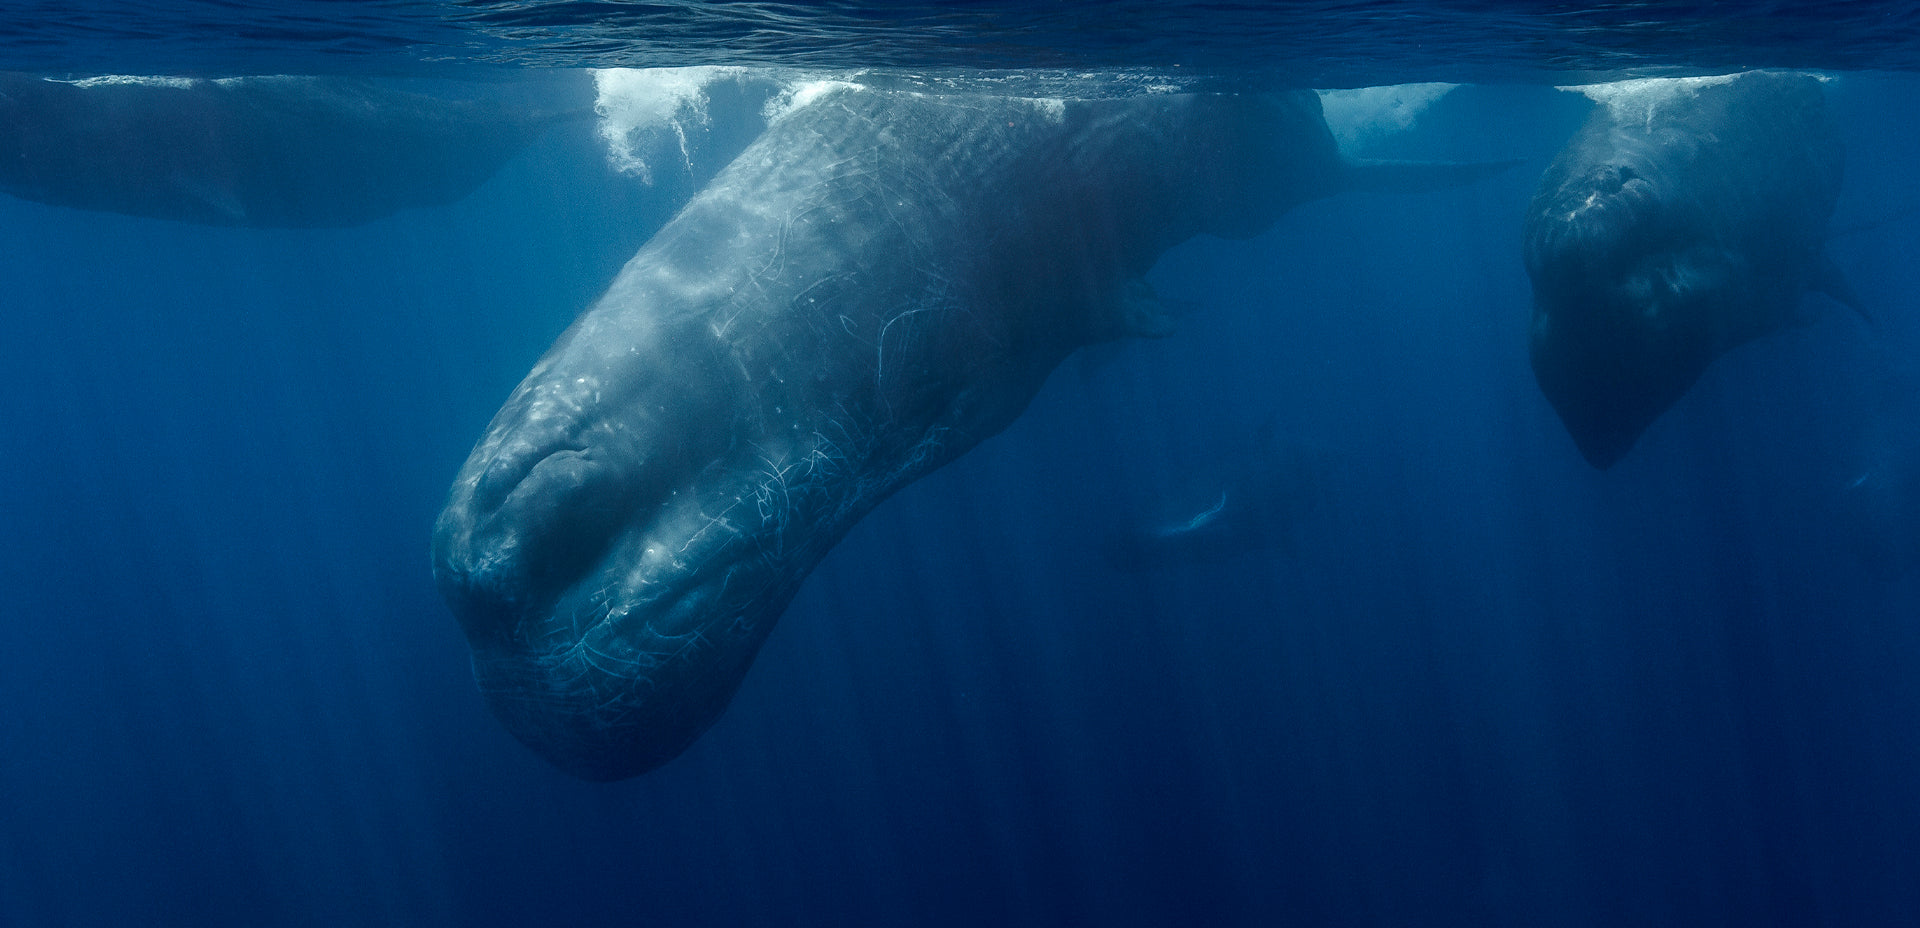 AI is About to Talk to Whales! What Will They Tell us?